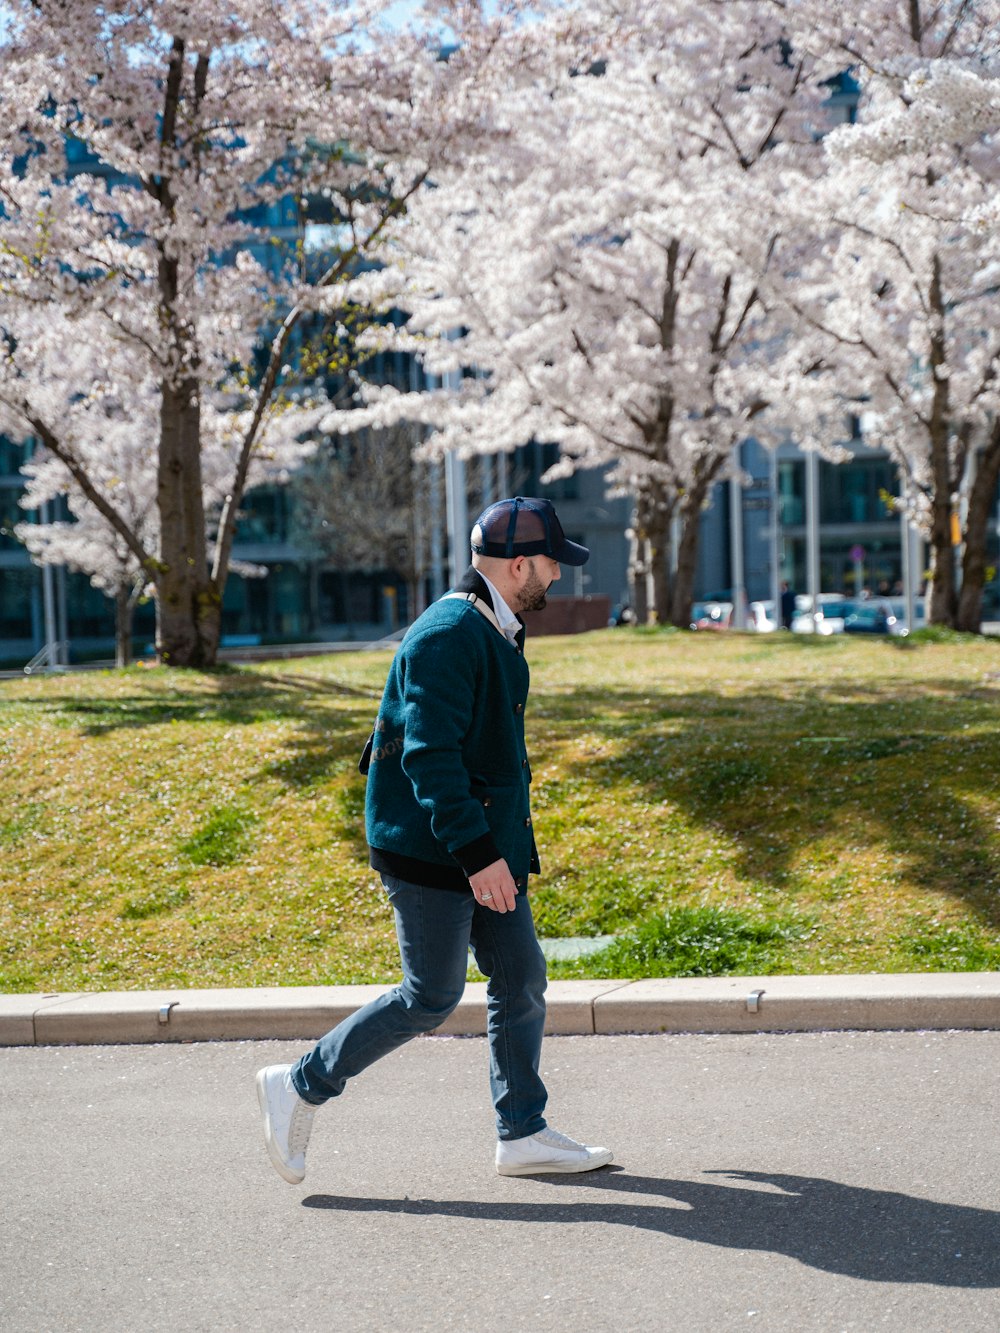 a man walking down the street in front of some cherry blossom trees